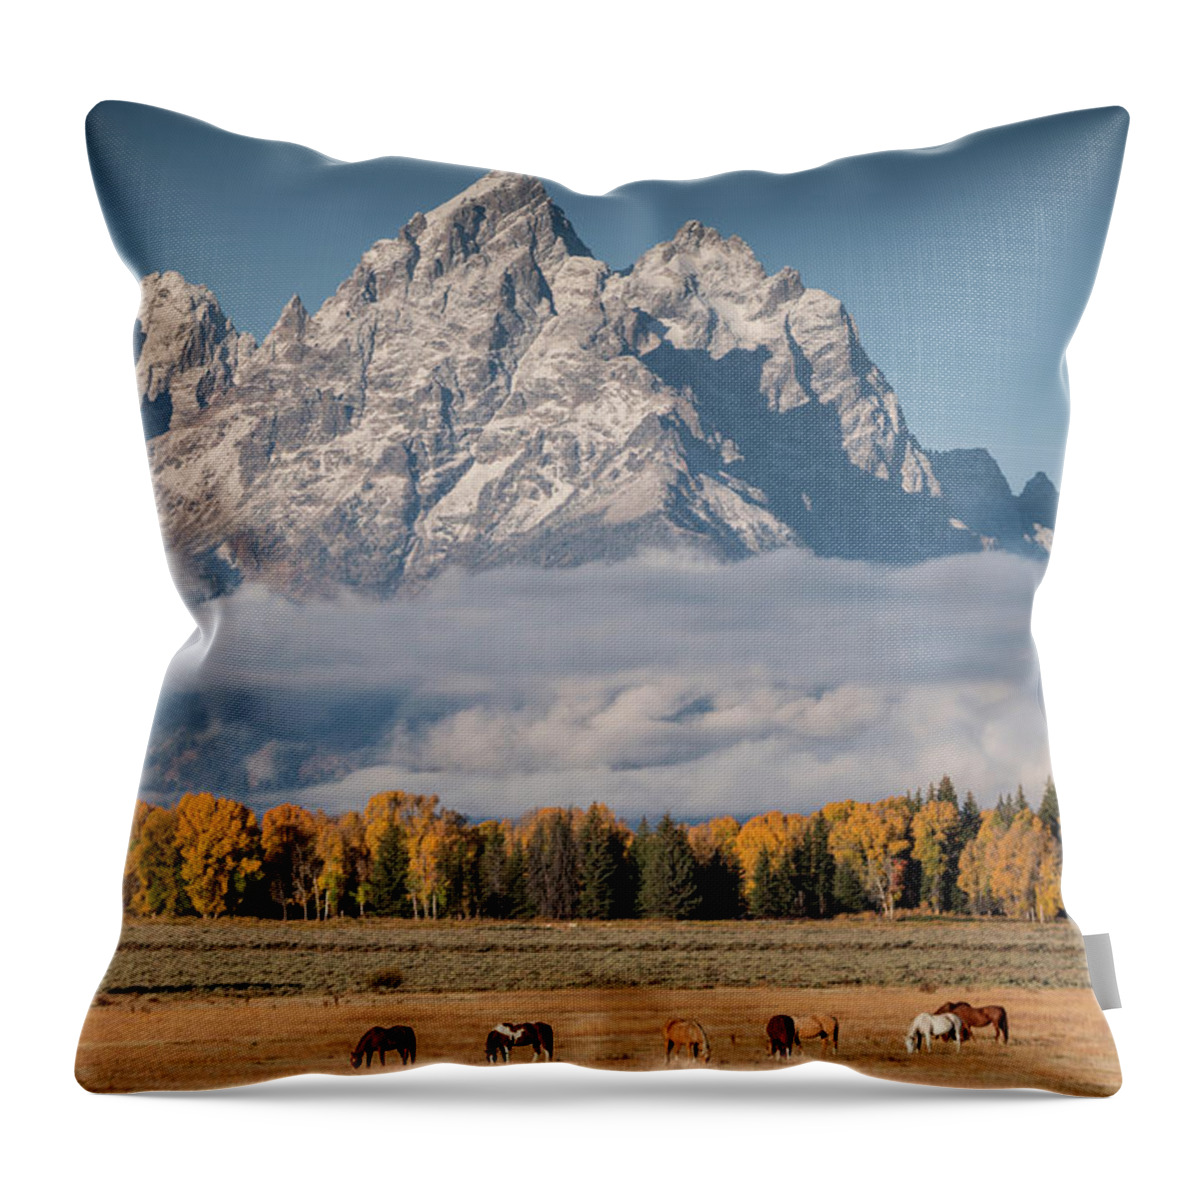 Horses Throw Pillow featuring the photograph Teton Horses by Wesley Aston